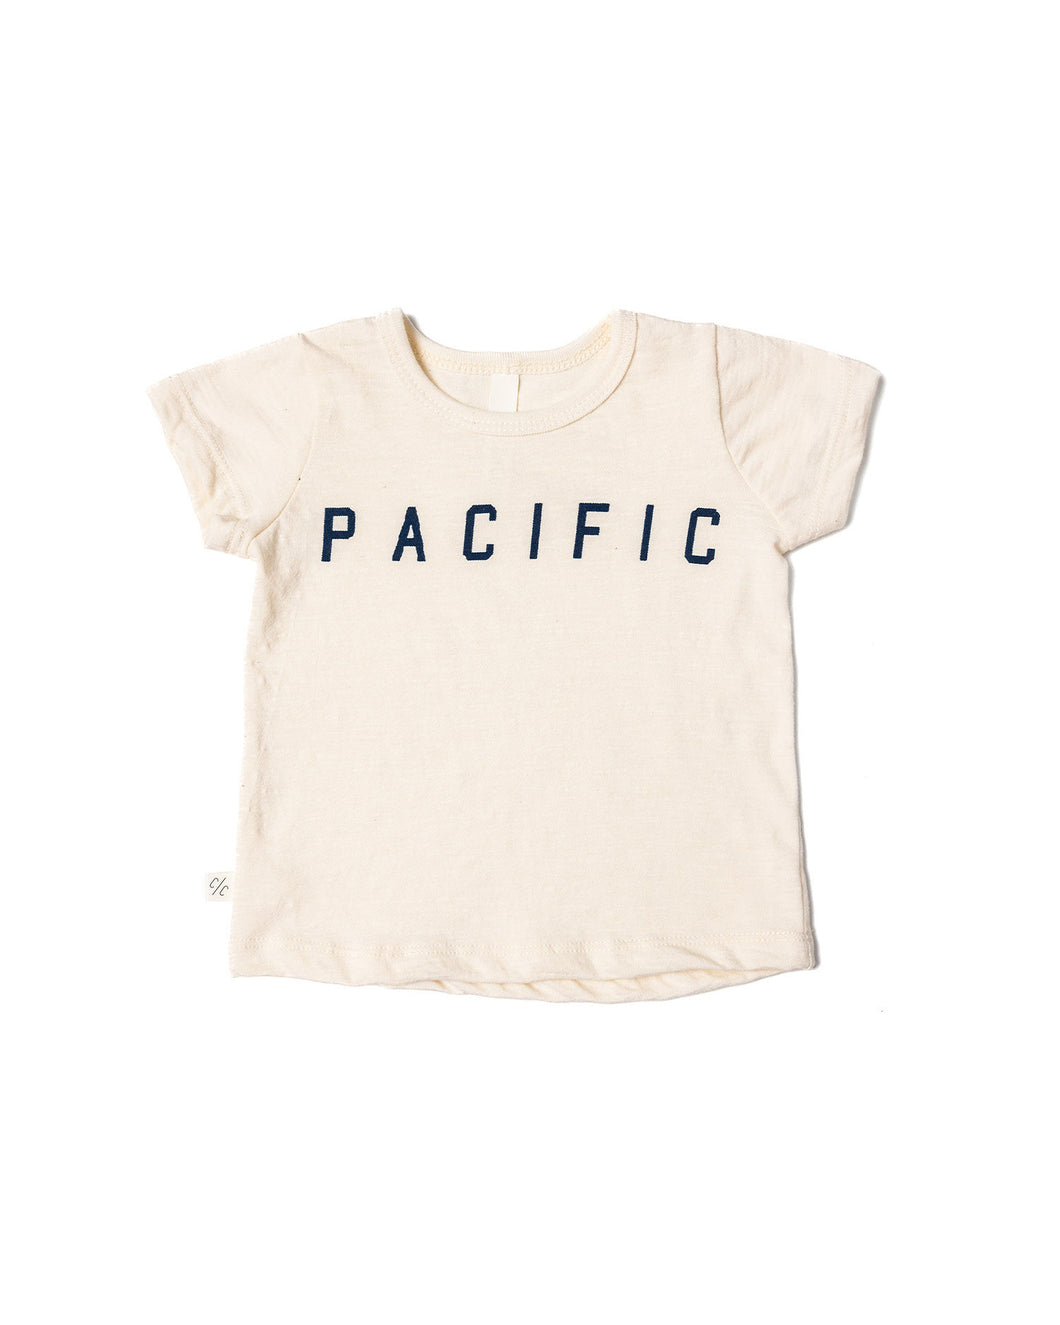 basic tee - pacific on natural